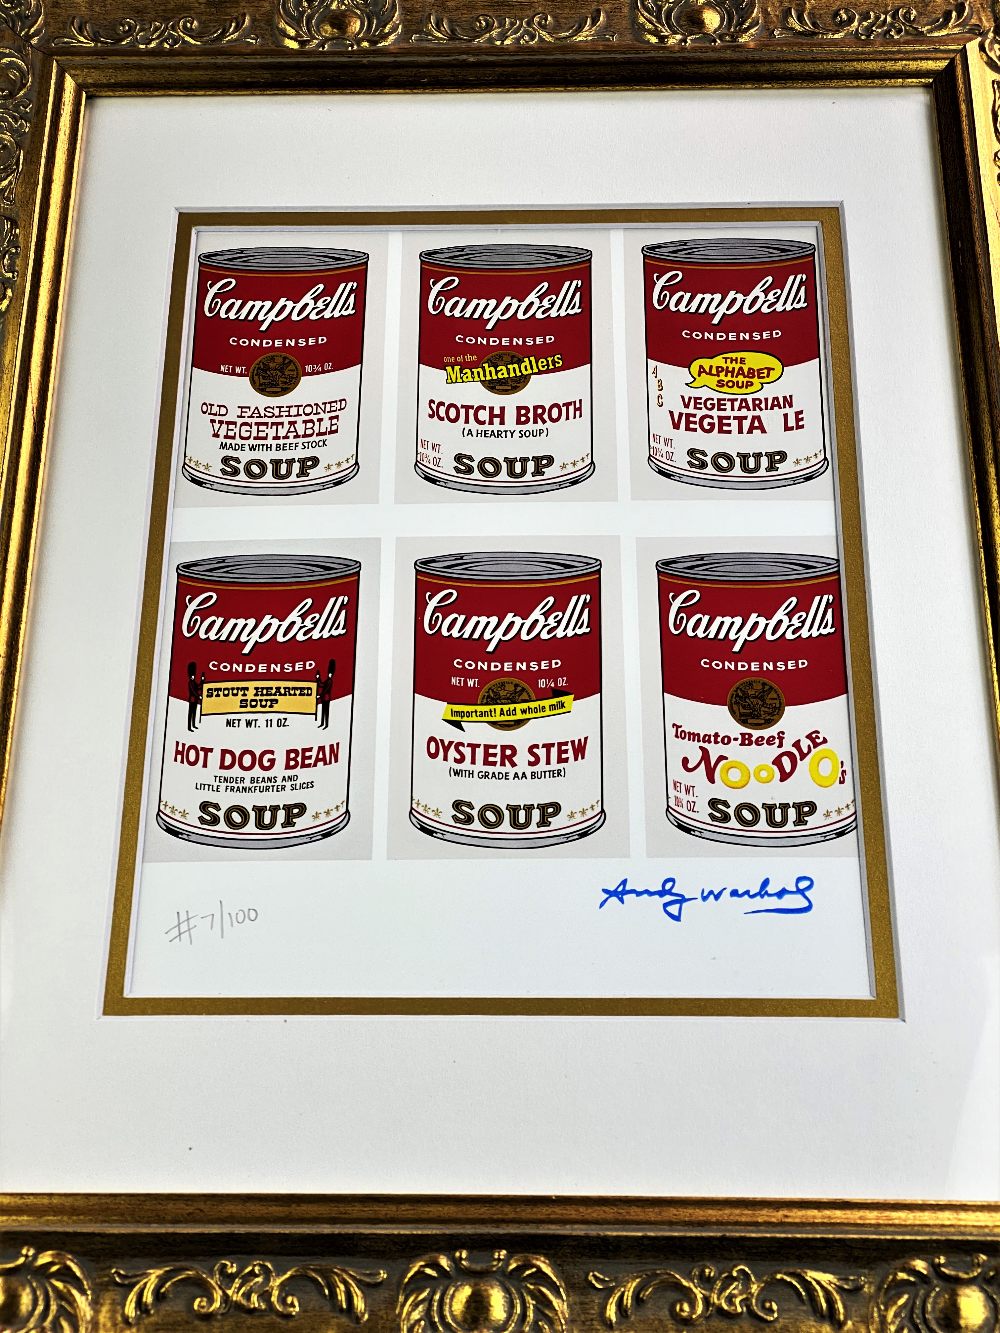 Andy Warhol 1984 "Cambells Soup" Lithograph # 7/100 Ltd Edition - Image 2 of 3